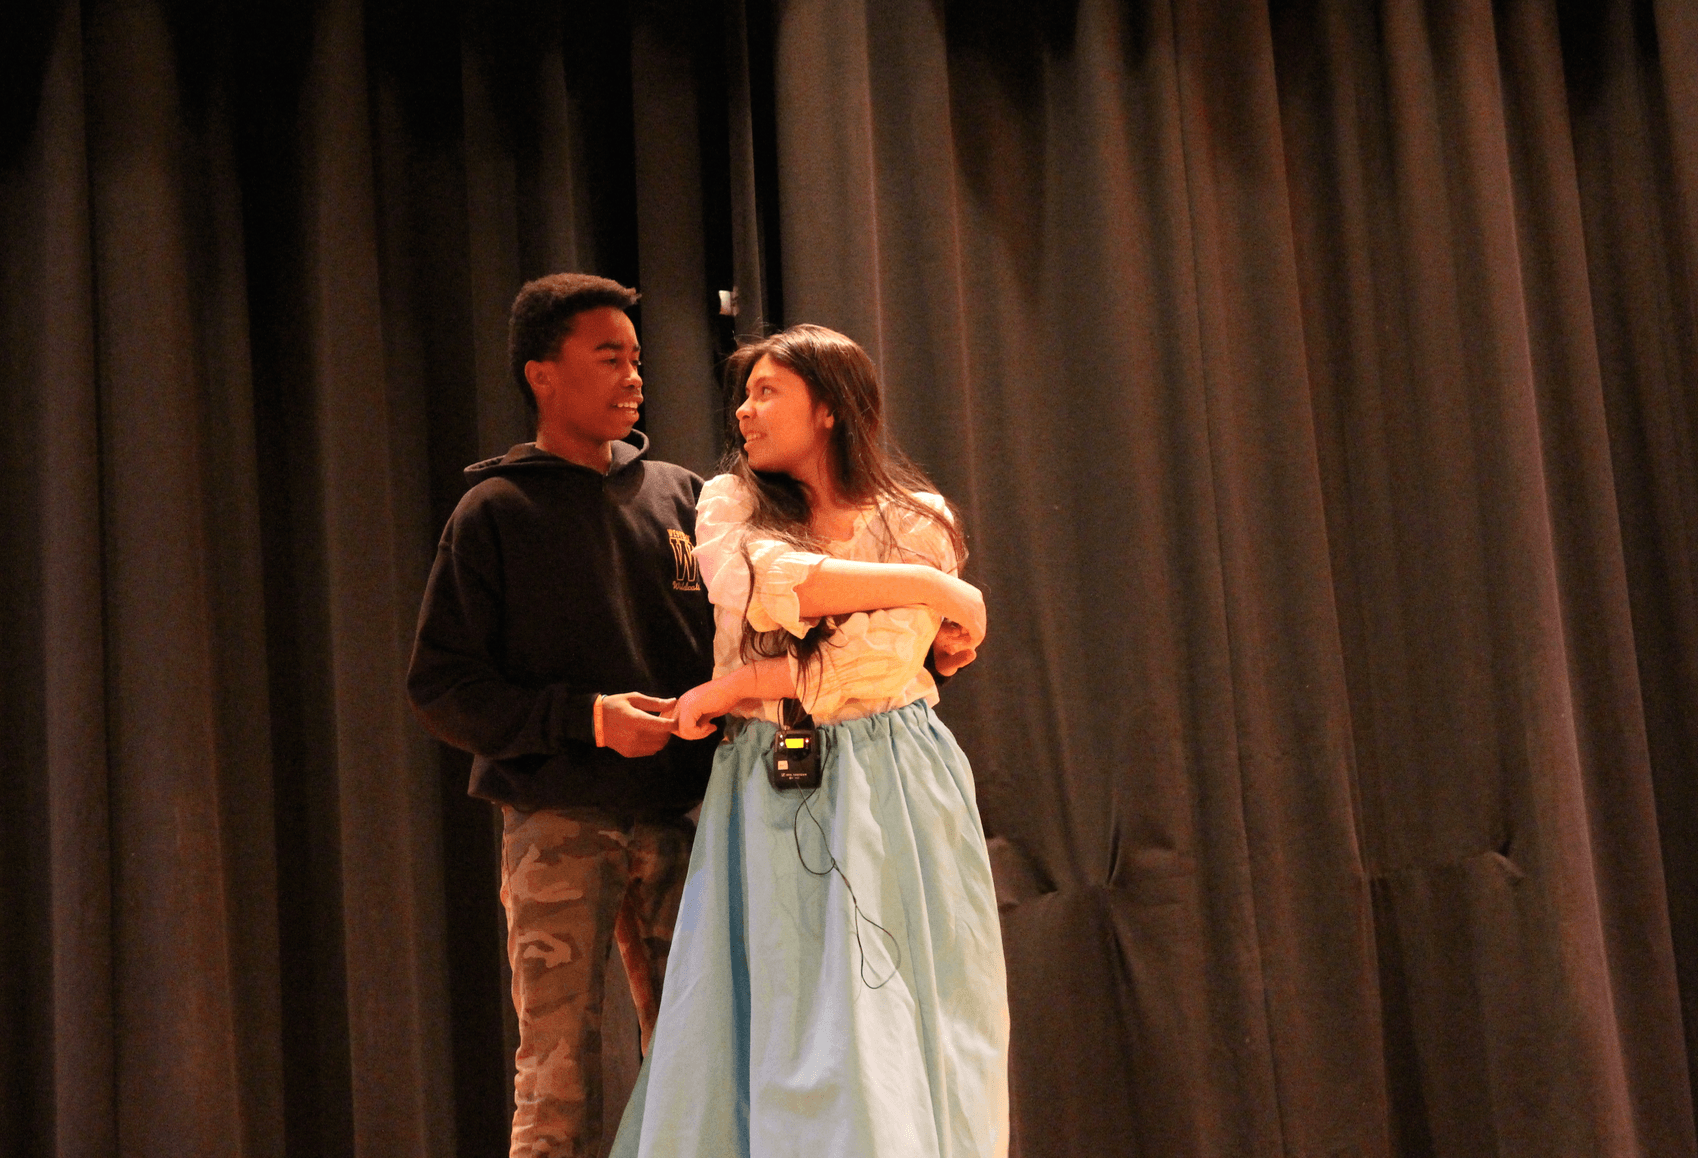 The Western Middle School Theater Club will perform The Little Mermaid Jr. on Friday, March 23 and Saturday, March 24, 2018. Photo: Leslie Yager